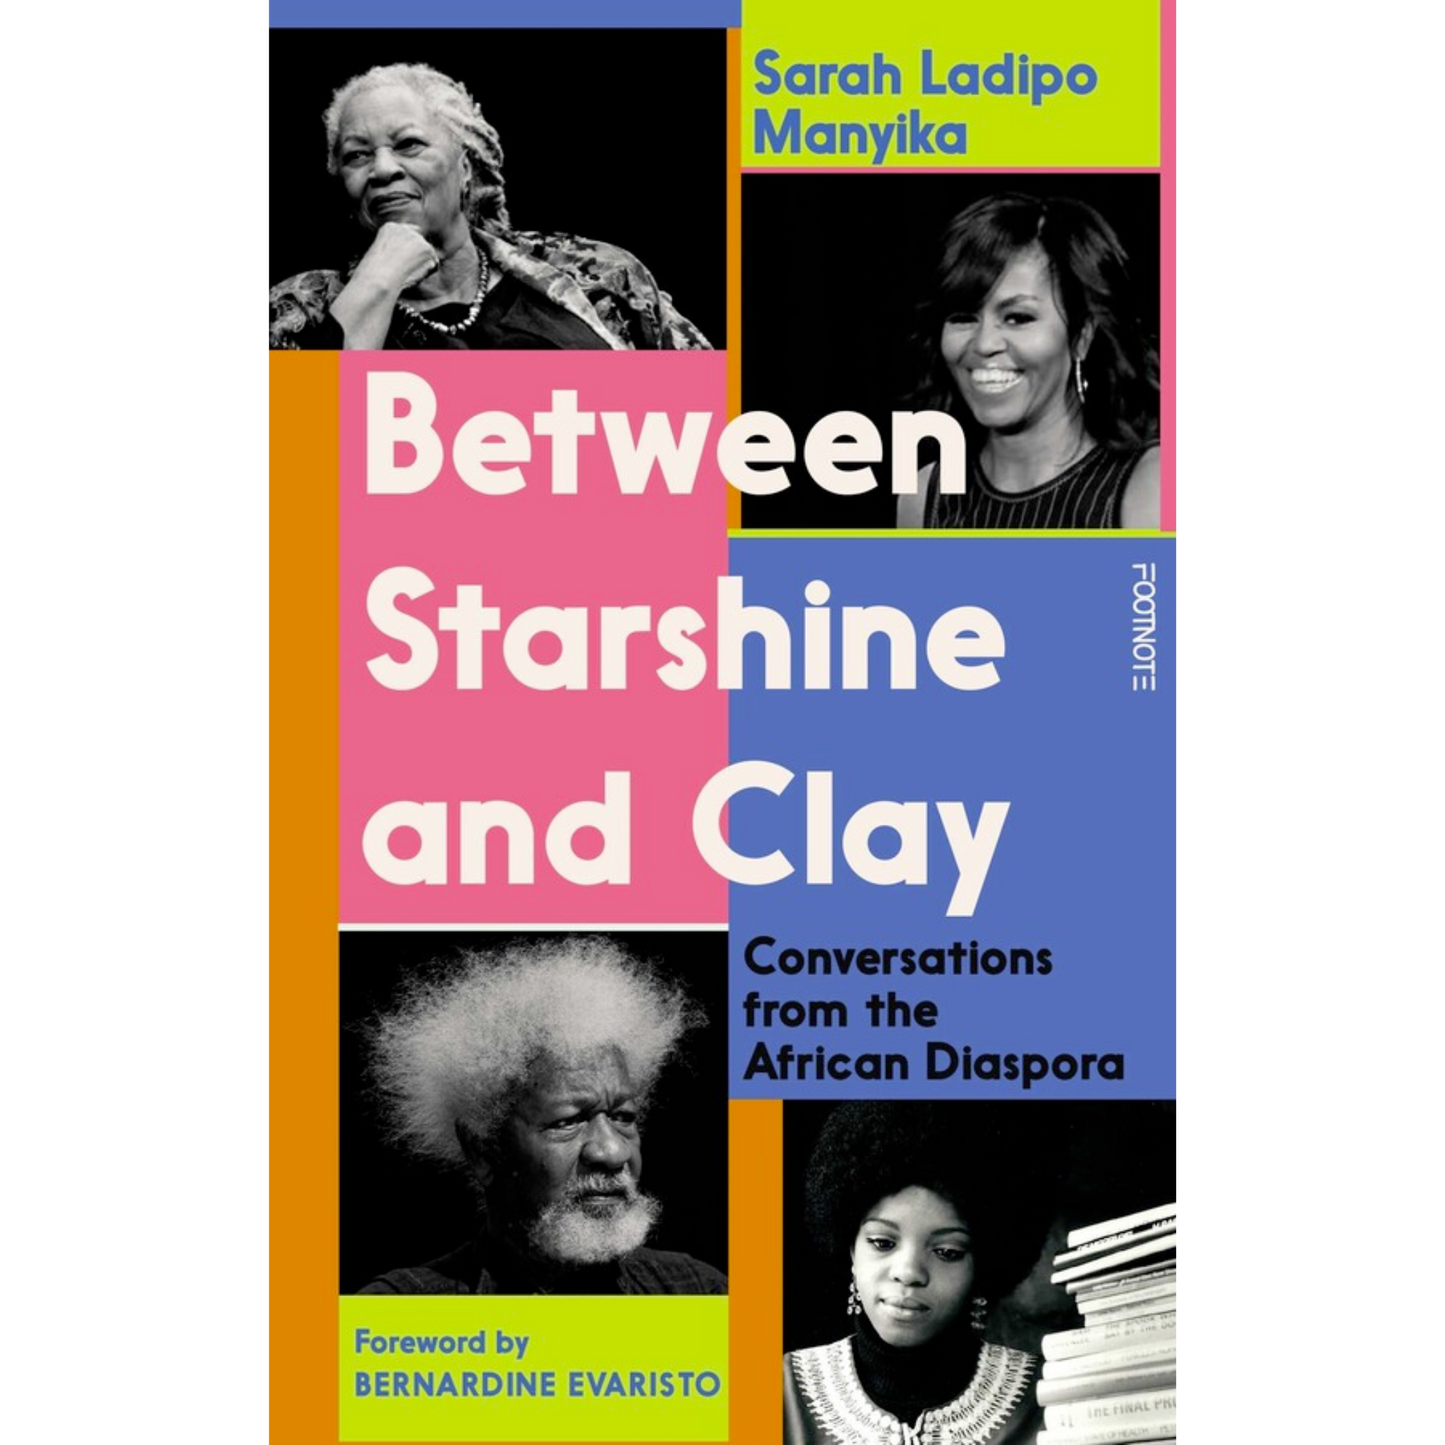 Between Starshine and Clay